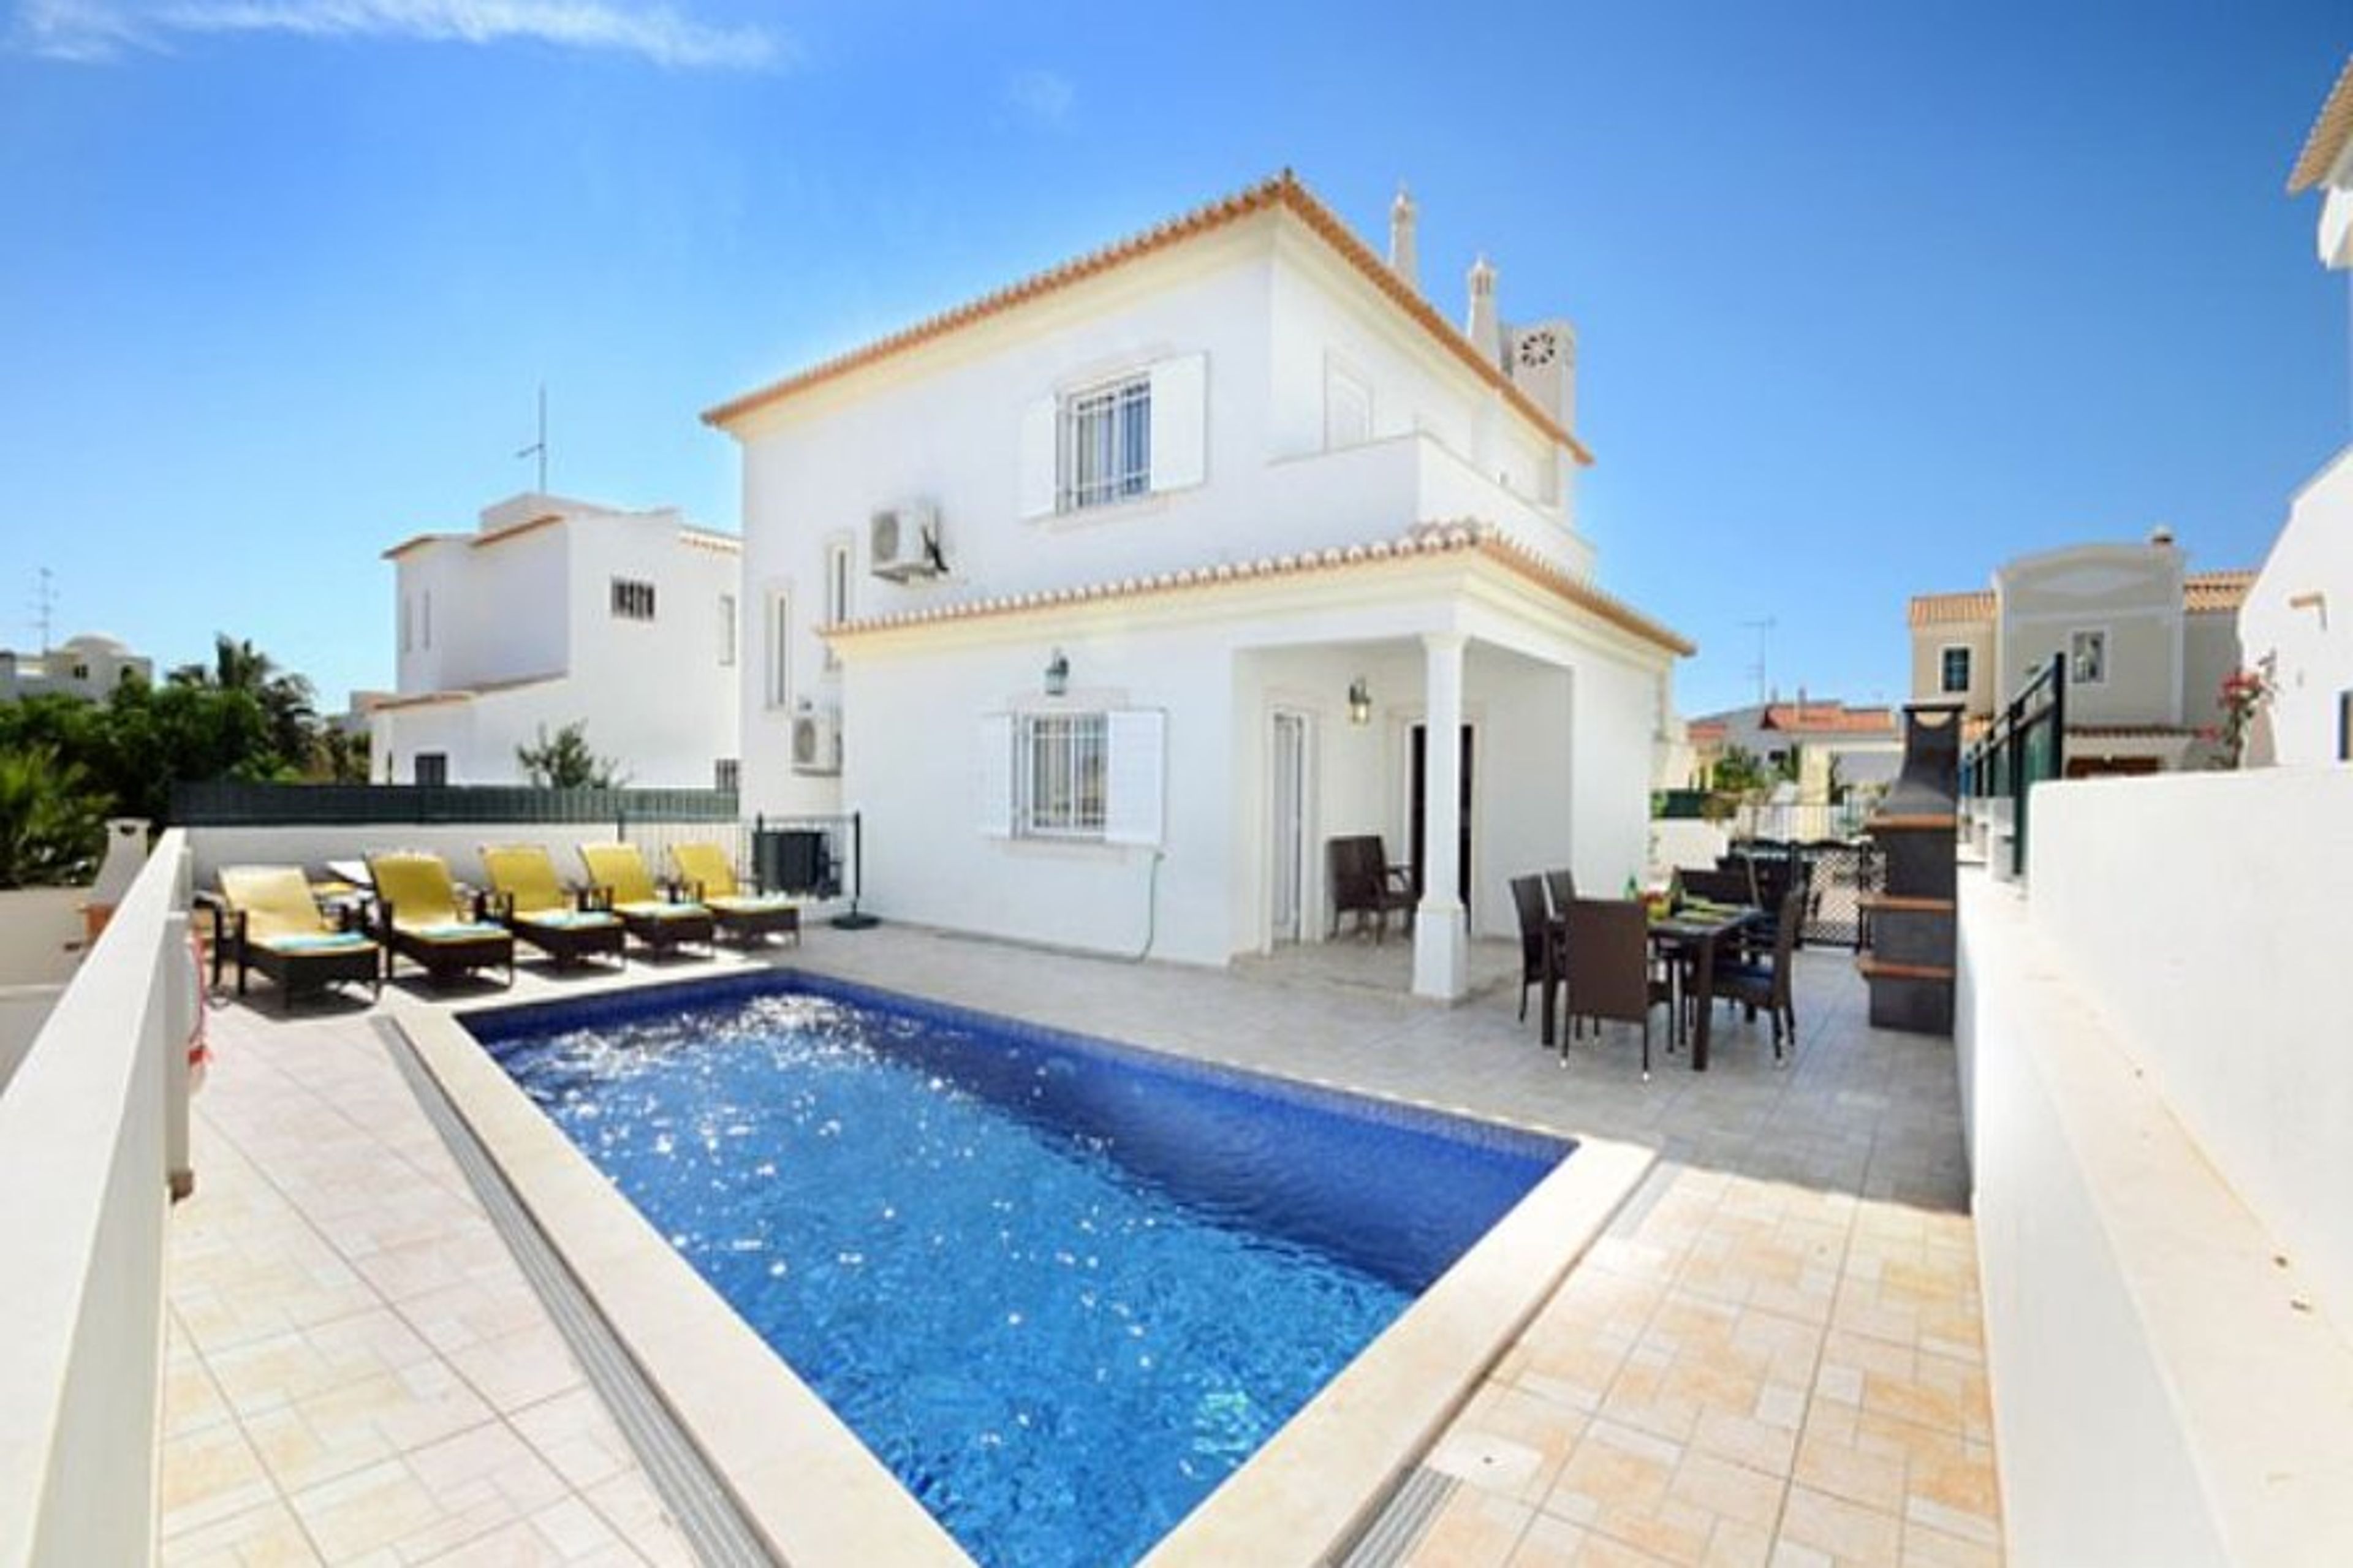 Villa Forte with heated private swimming pool